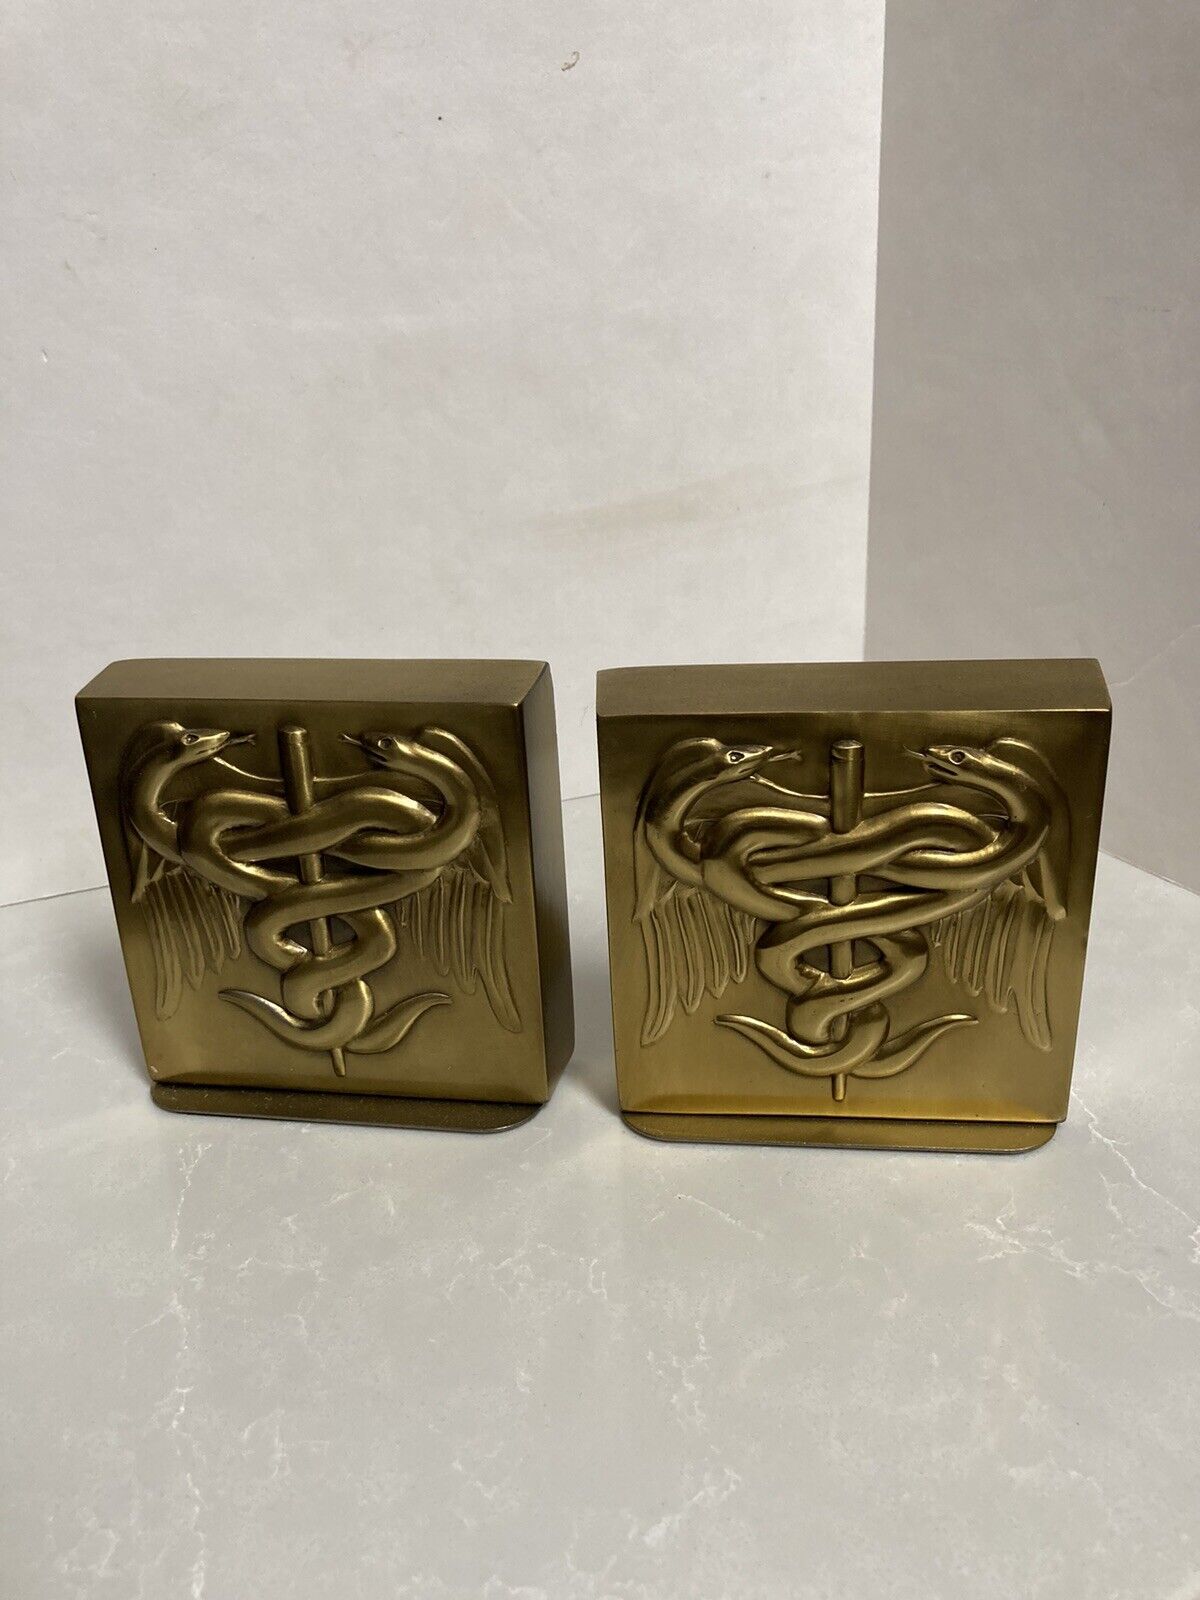 Vintage PM Craftsman Doctor Physician Medical Caduceus Serpents Brass 2 Bookends